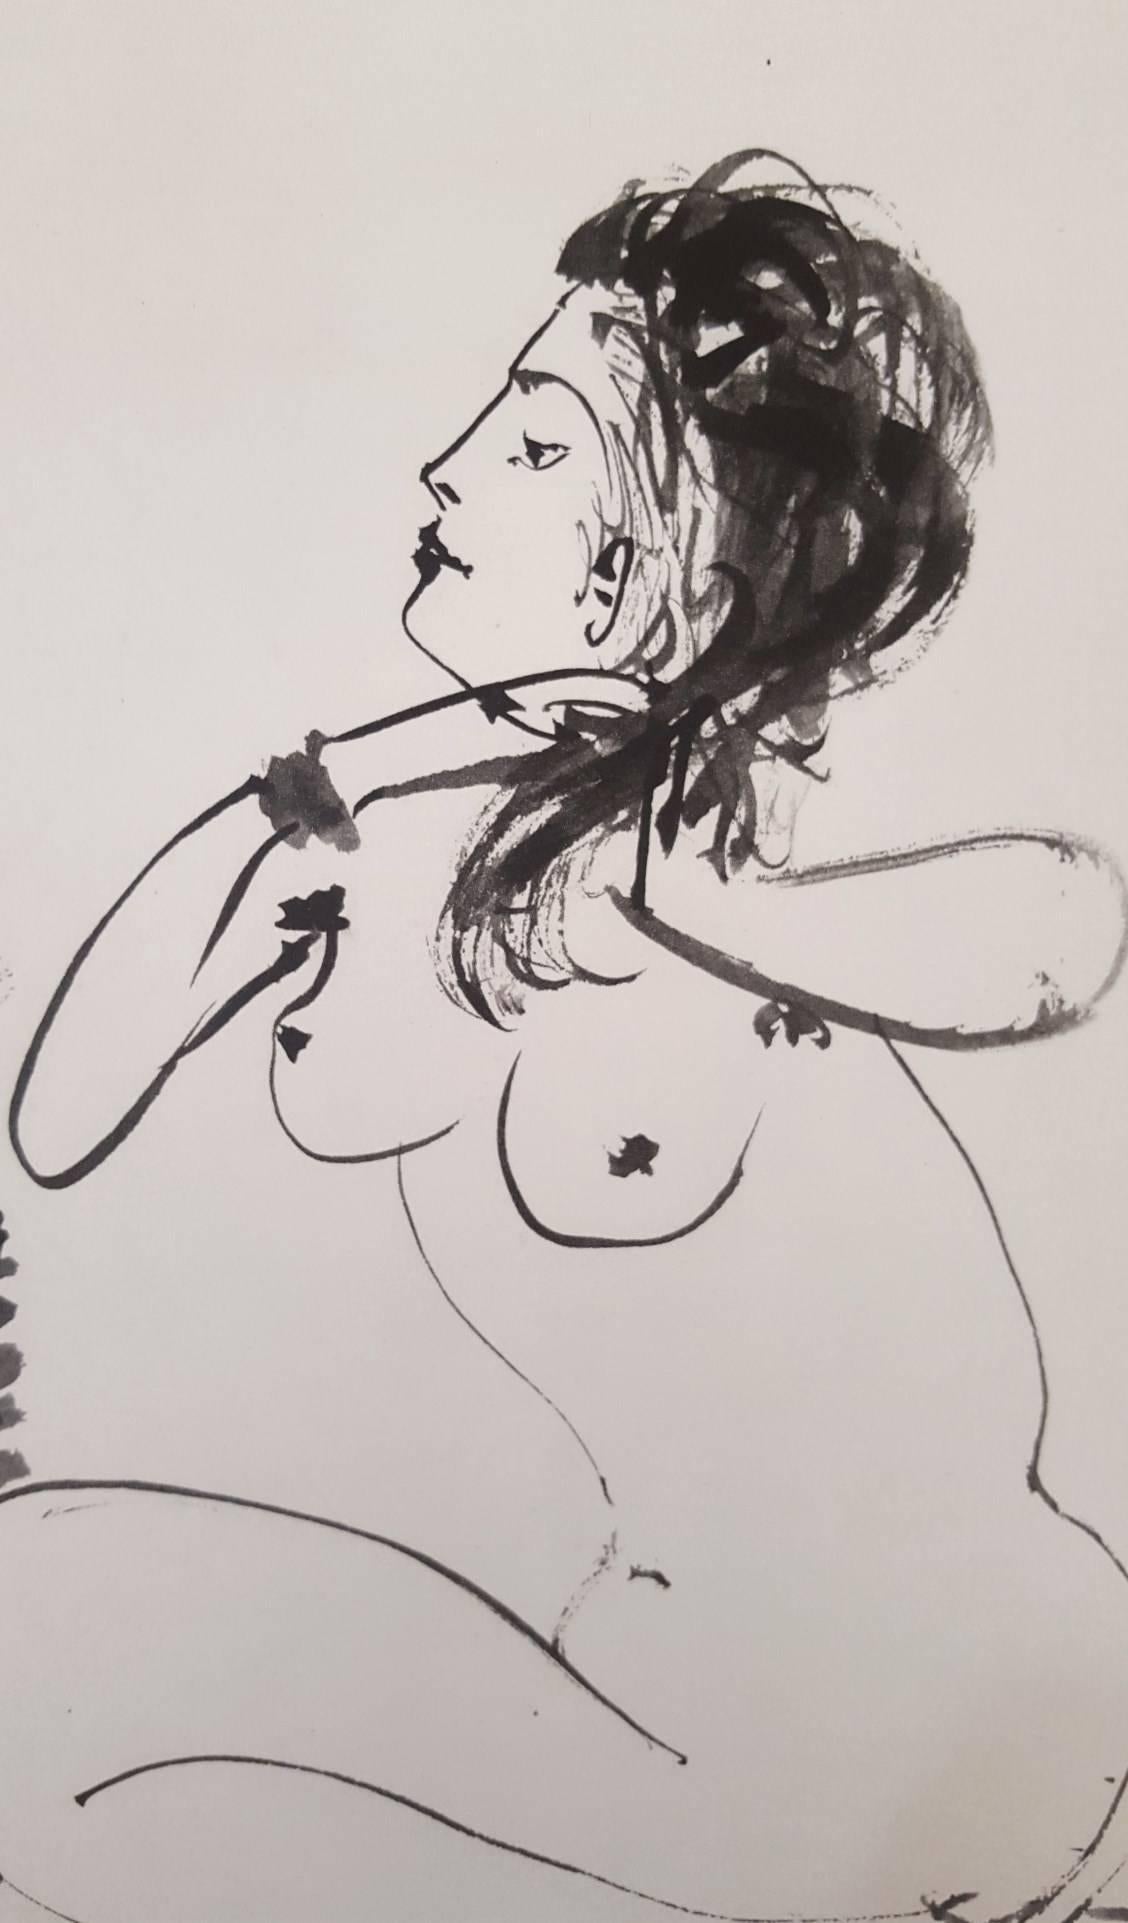 An original heliogravure by Spanish artist Pablo Picasso (1881-1973) titled 